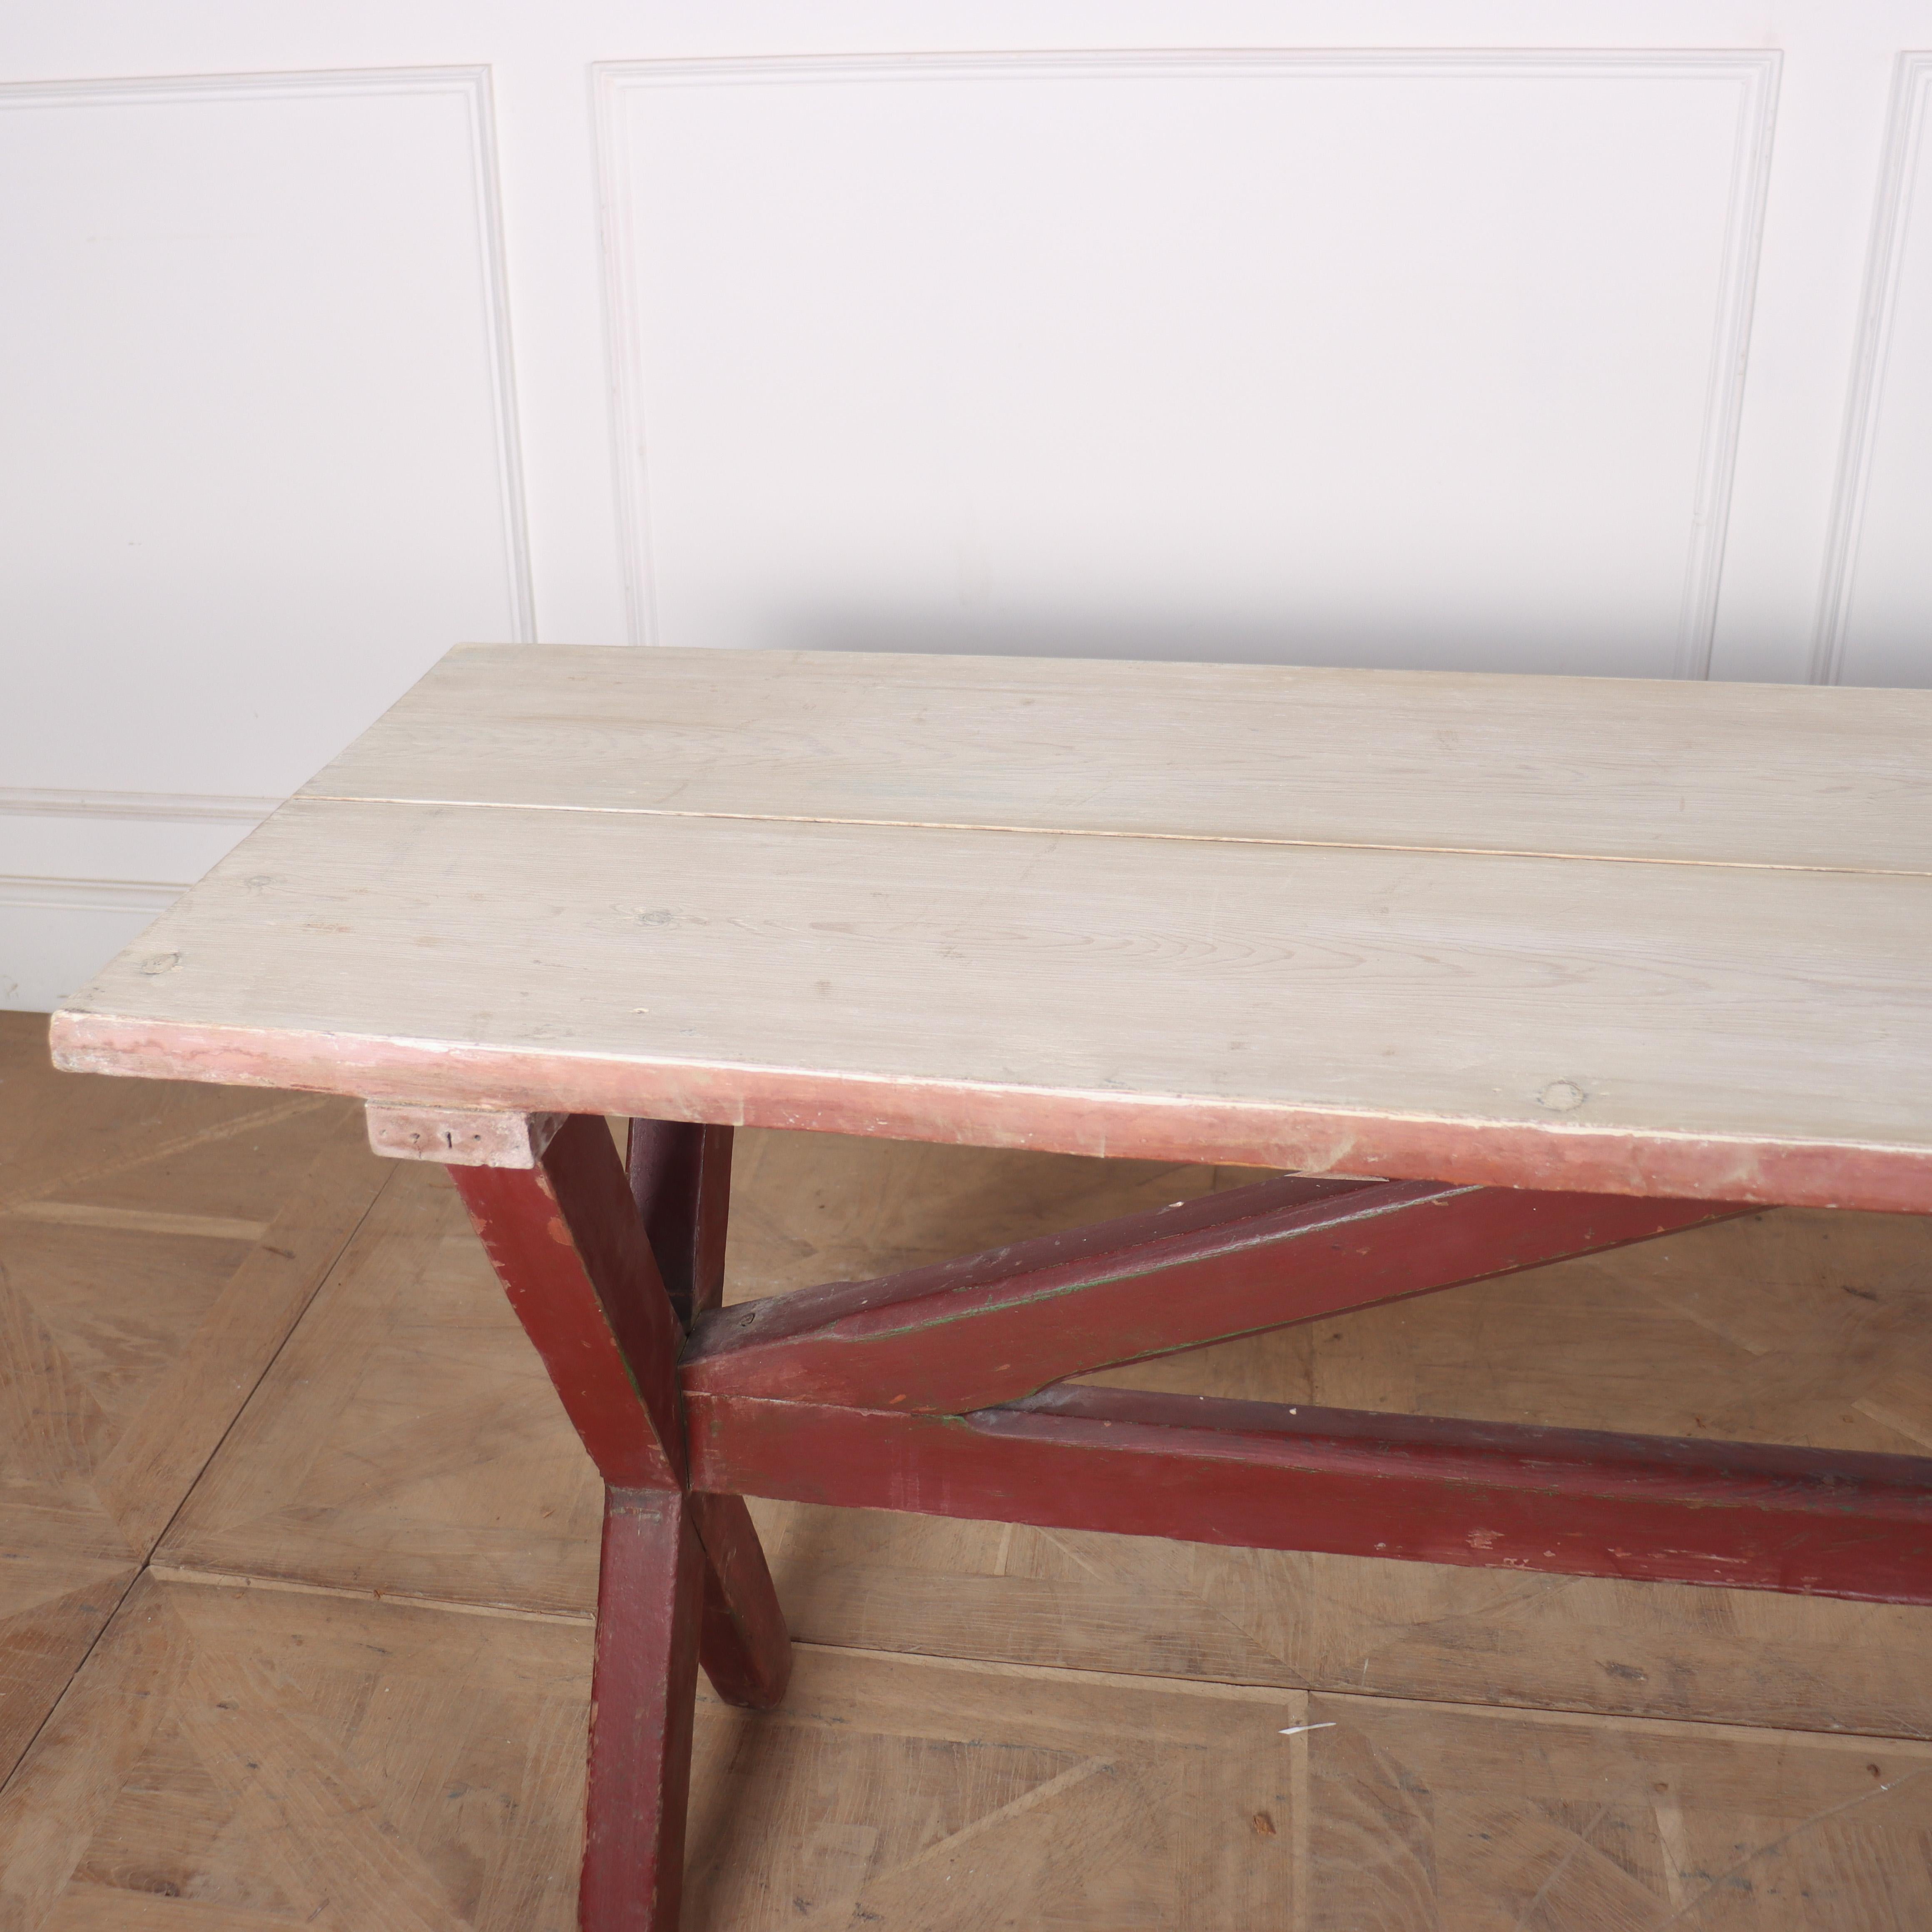 Original Painted Tavern Table In Good Condition For Sale In Leamington Spa, Warwickshire